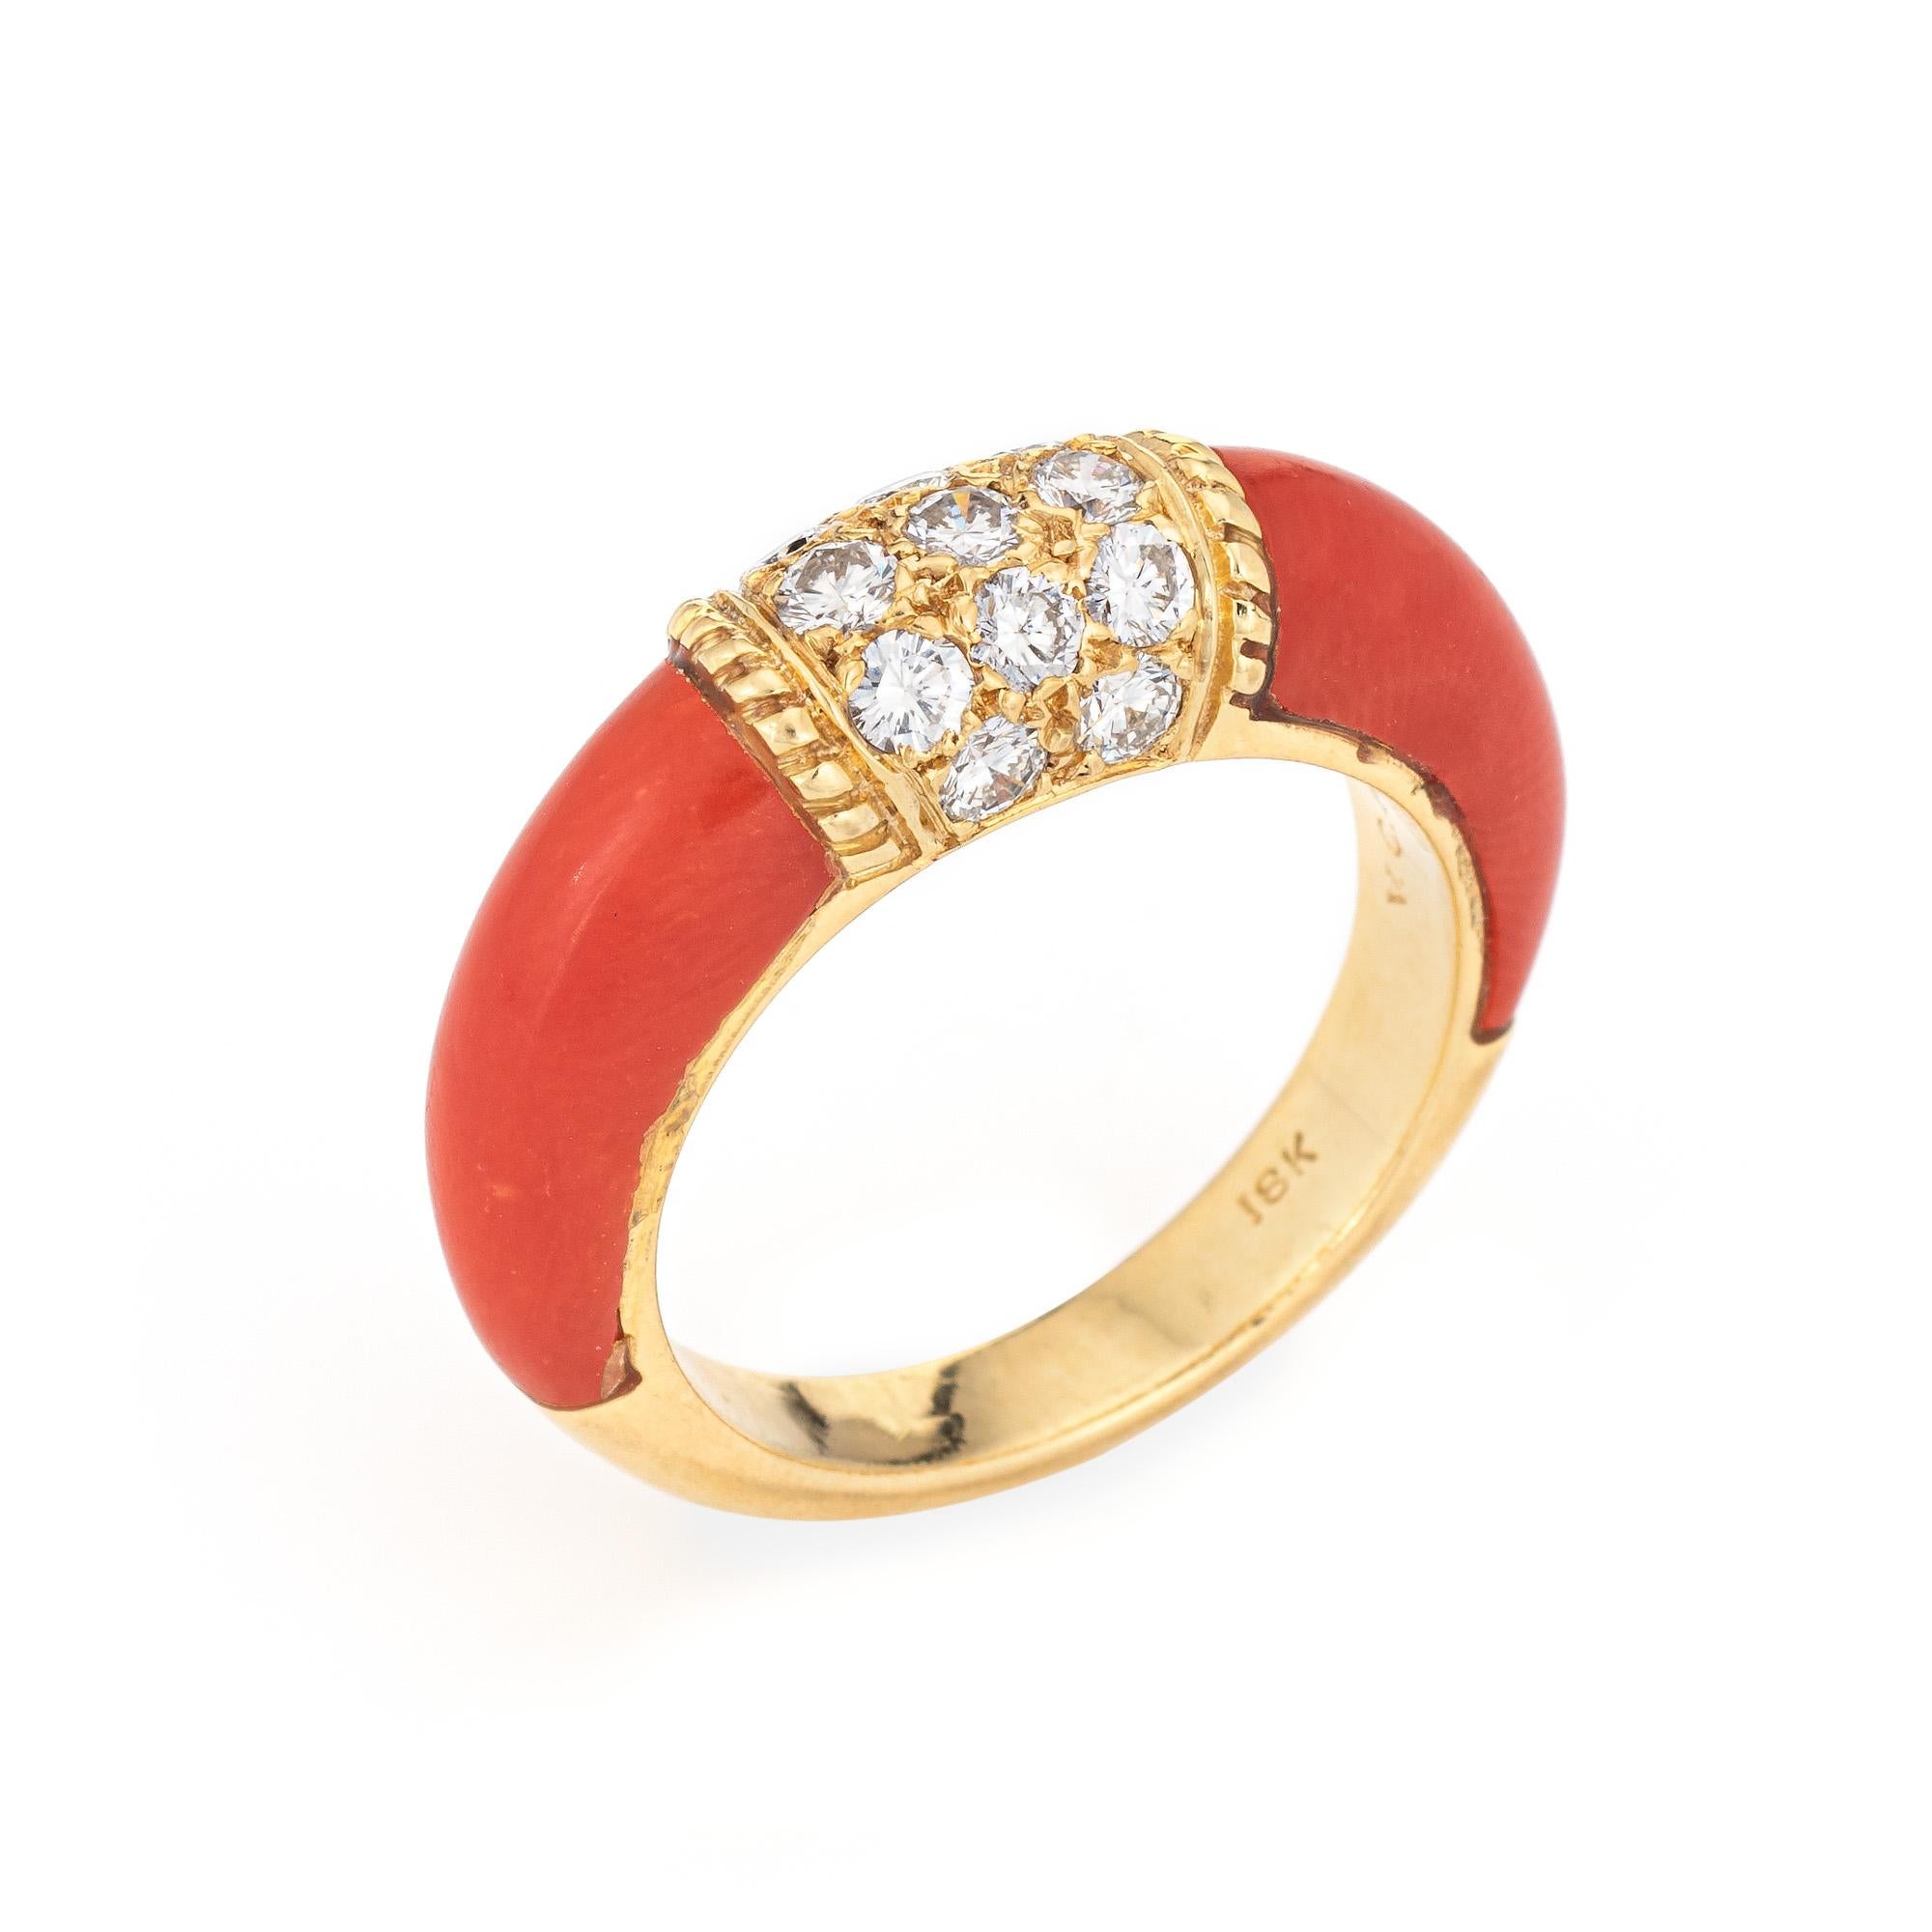 Stylish vintage Van Cleef & Arpels coral & diamond ring crafted in 18 karat yellow gold. 

13 round brilliant cut diamonds total an estimated 0.65 carats (estimated at F-G color and VVS2 clarity). Coral is inlaid into the side shoulders and measures